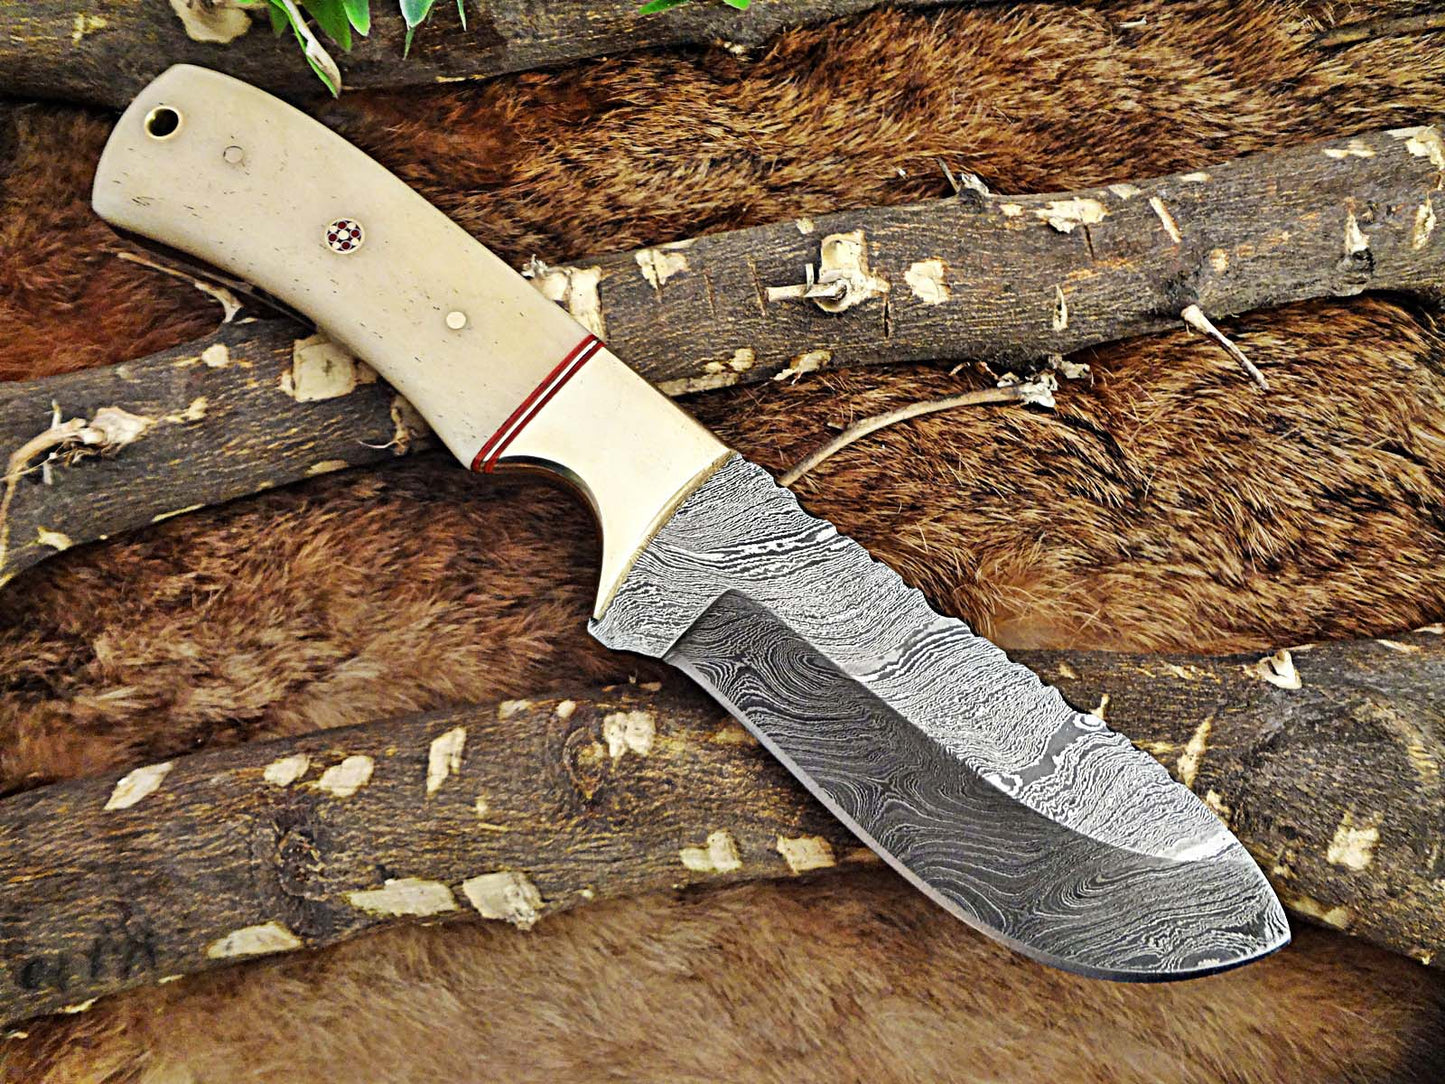 9" Damascus steel full tang Skinning Knife, Black and white scales with Brass Bolster scale, Cow hide Leather sheath included